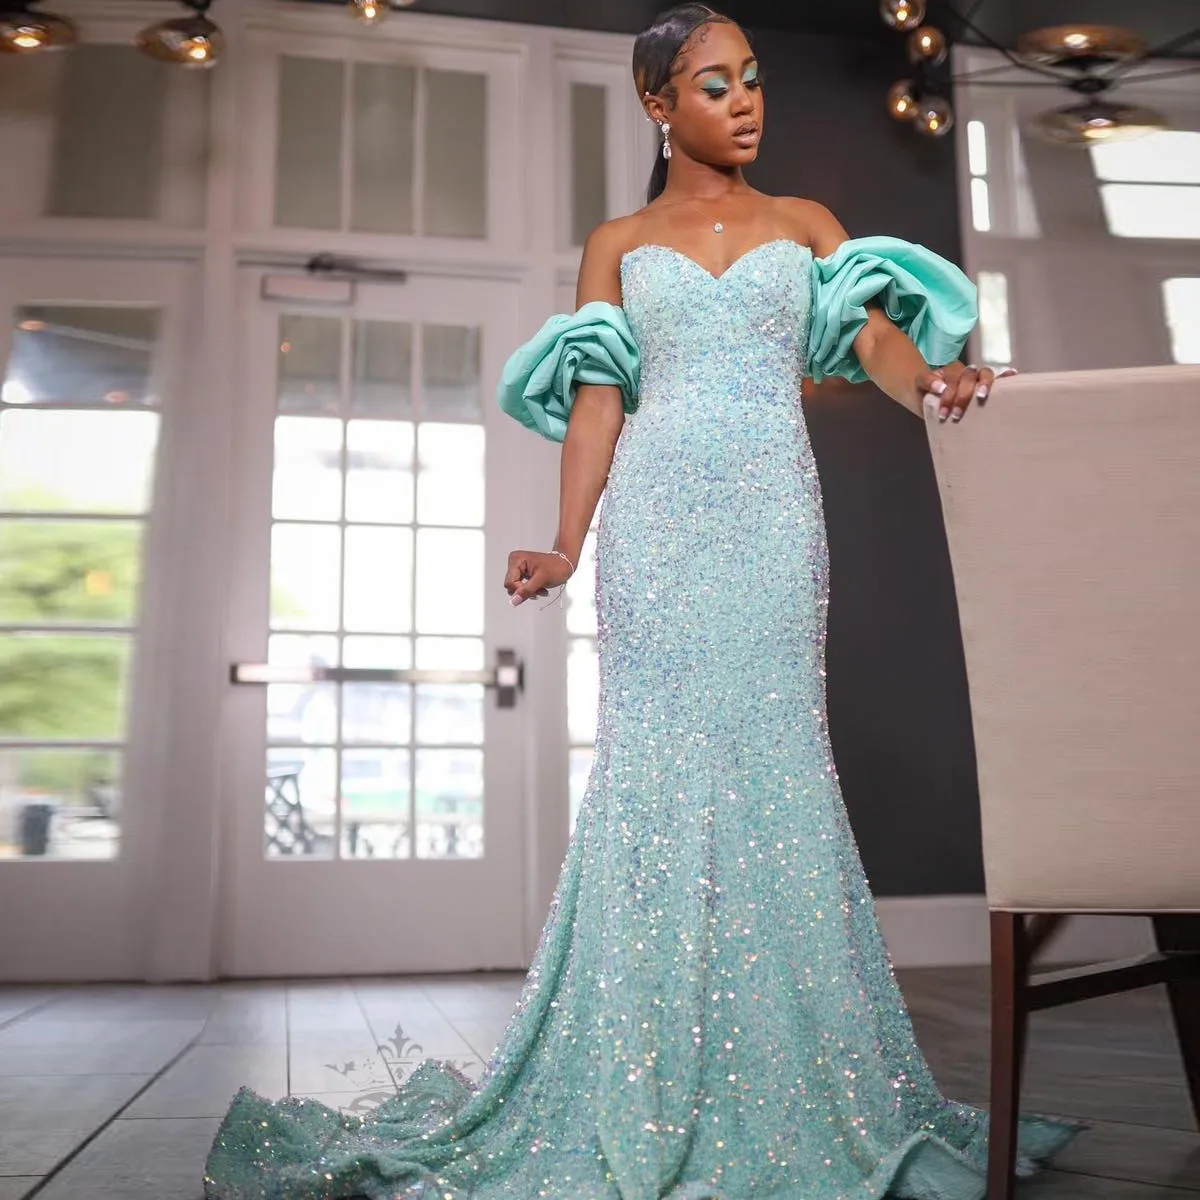 Sparkly Light Blue Evening Dress Sequined Formal Occasion Elegant Party Mermaid Prom Dresses Sheath Off The Shoulder Robe De Bal Custom Gown